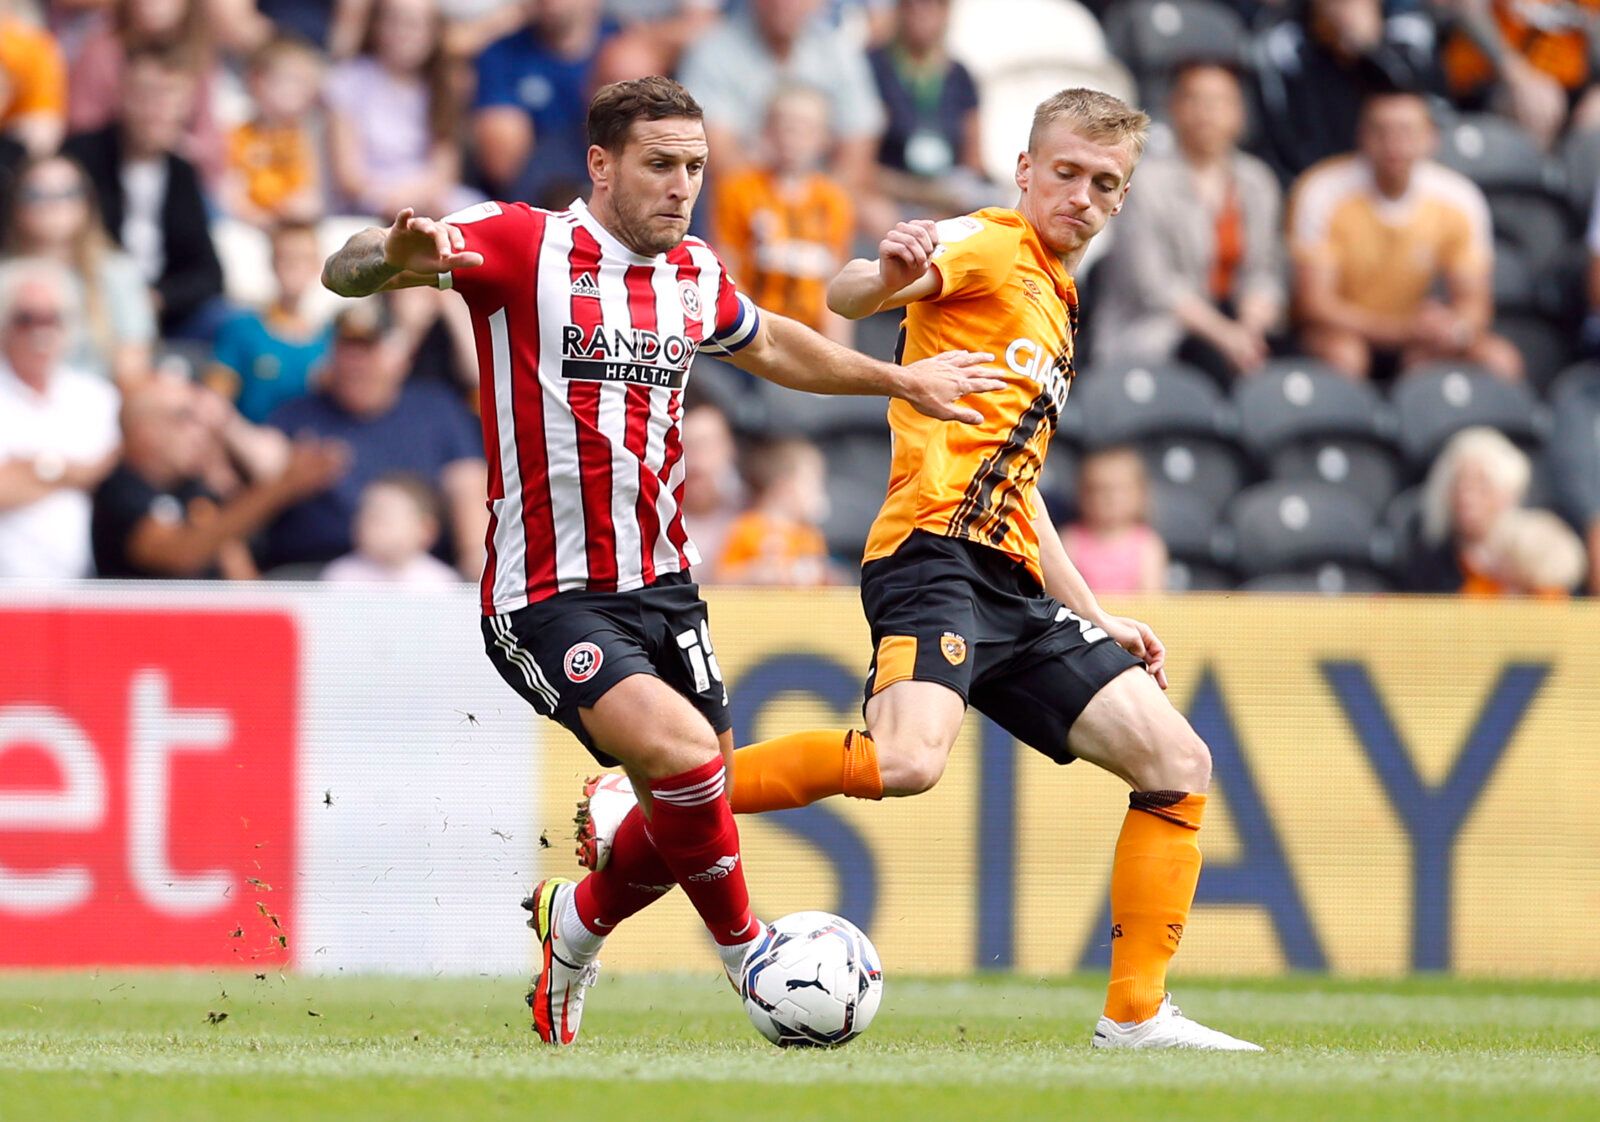 Soccer Football - Championship - Hull City v Sheffield United - KCOM Stadium, Hull, Britain - September 18, 2021 Sheffield United's Billy Sharp in action with Hull City's Matt Smith Action Images/Ed Sykes EDITORIAL USE ONLY. No use with unauthorized audio, video, data, fixture lists, club/league logos or 'live' services. Online in-match use limited to 75 images, no video emulation. No use in betting, games or single club /league/player publications.  Please contact your account representative fo